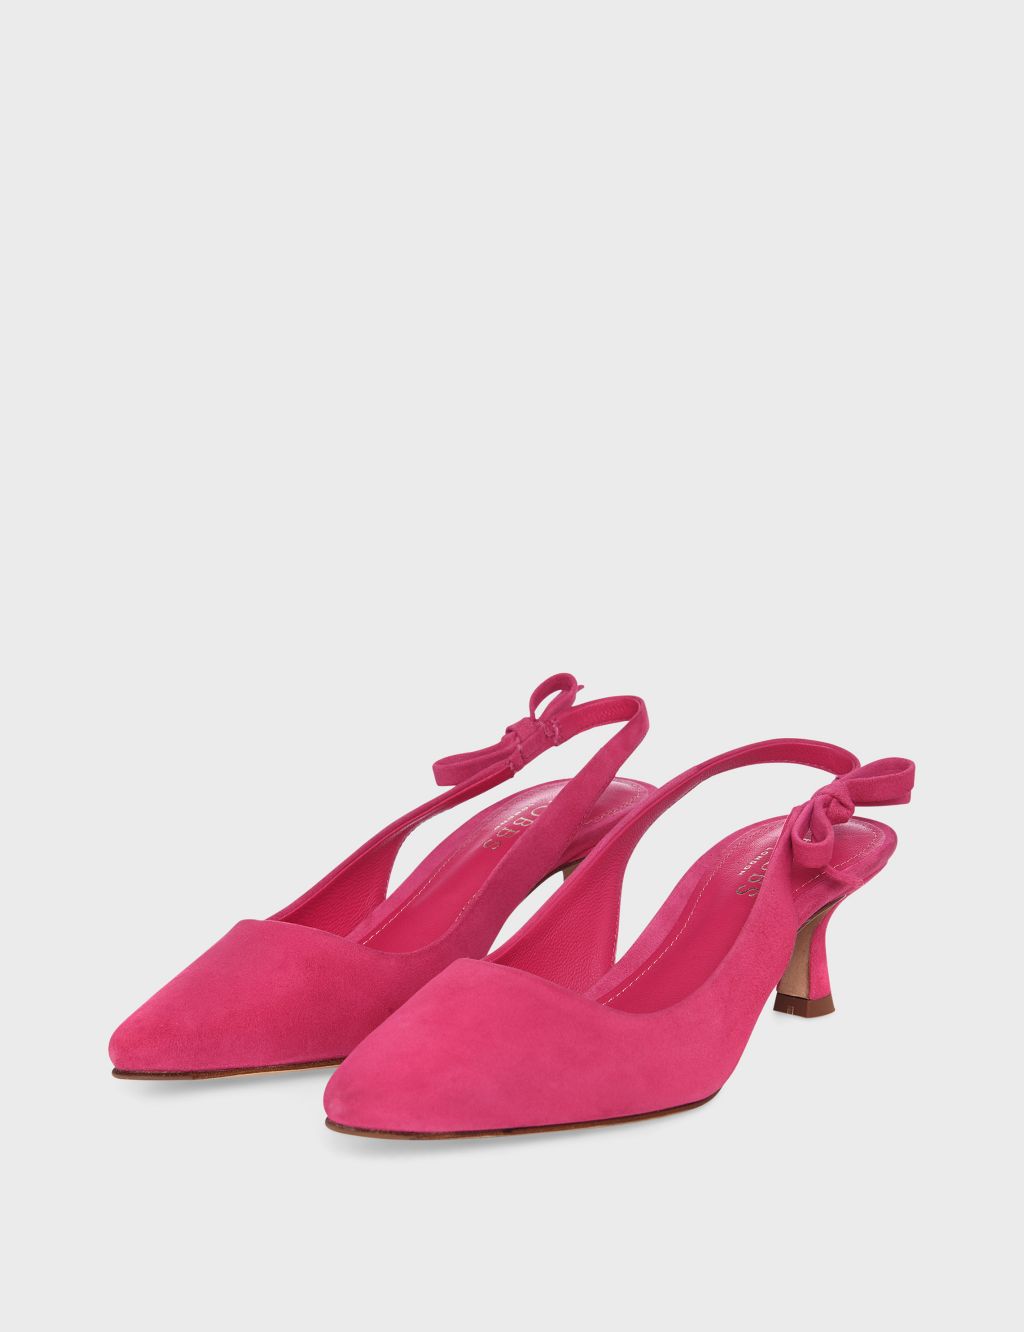 Suede Bow Kitten Heel Slingback Shoes image 2